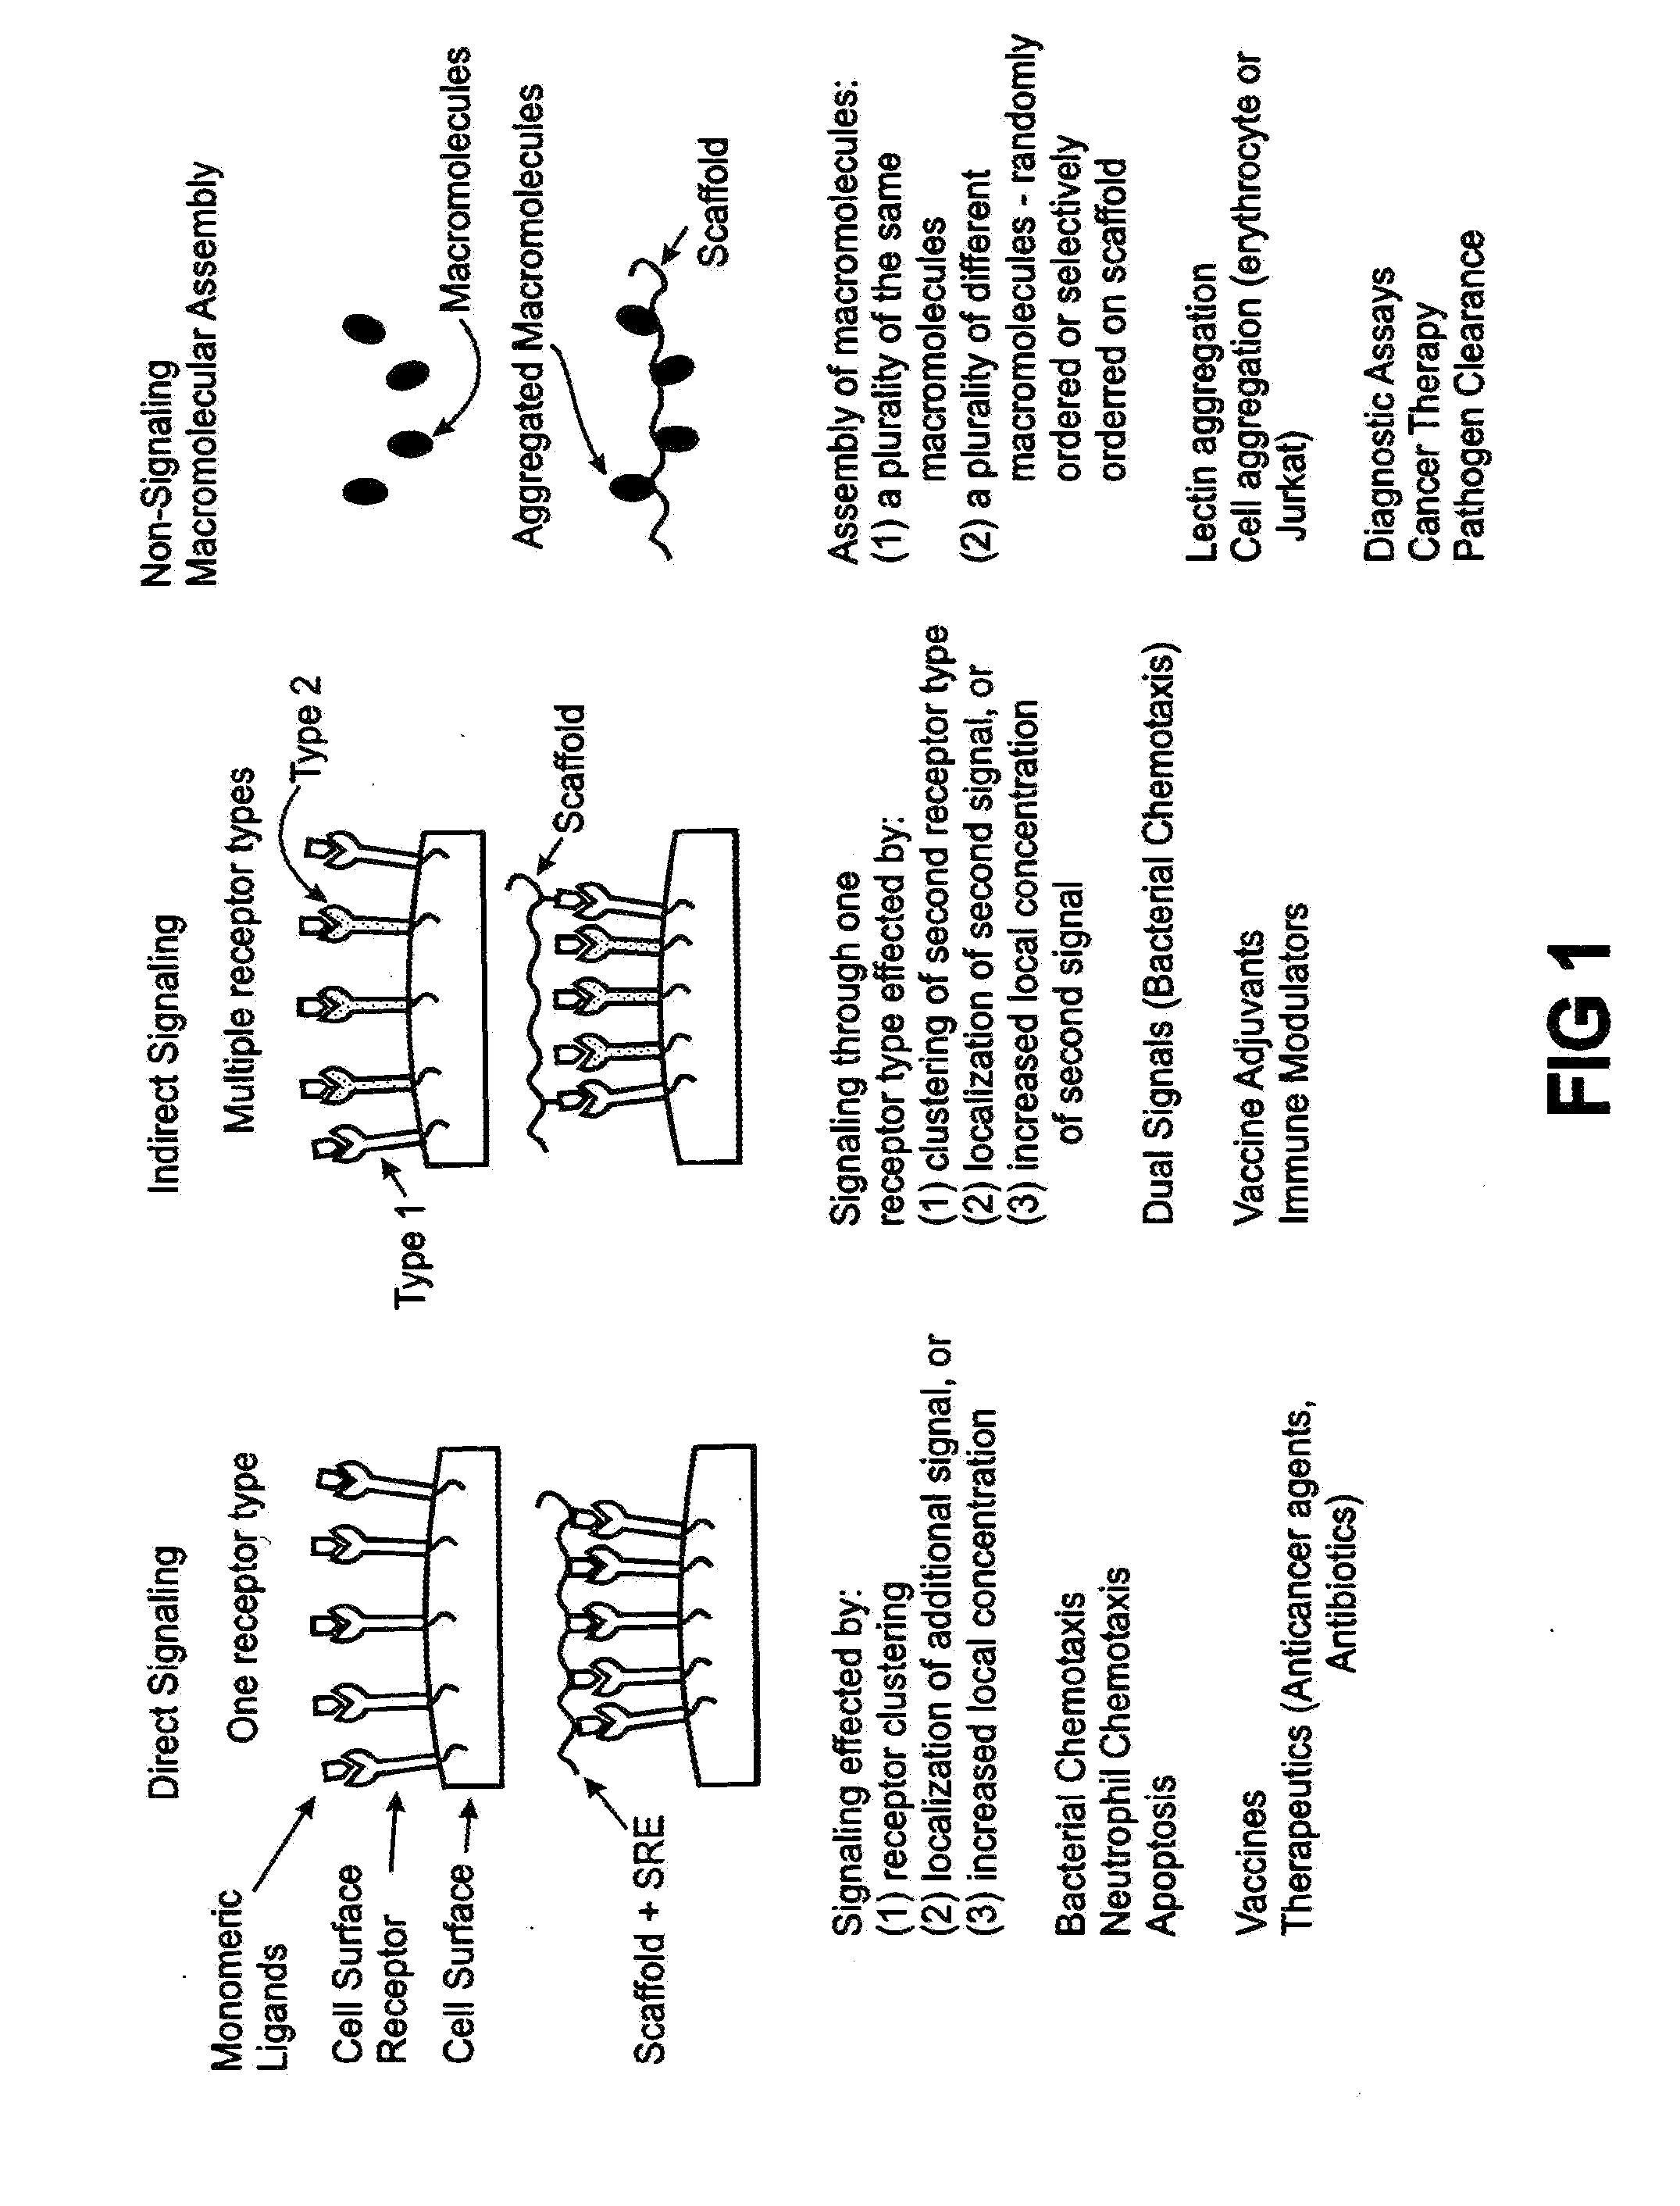 Methods and Reagents for Regulation of Cellular Responses in Biological Systems